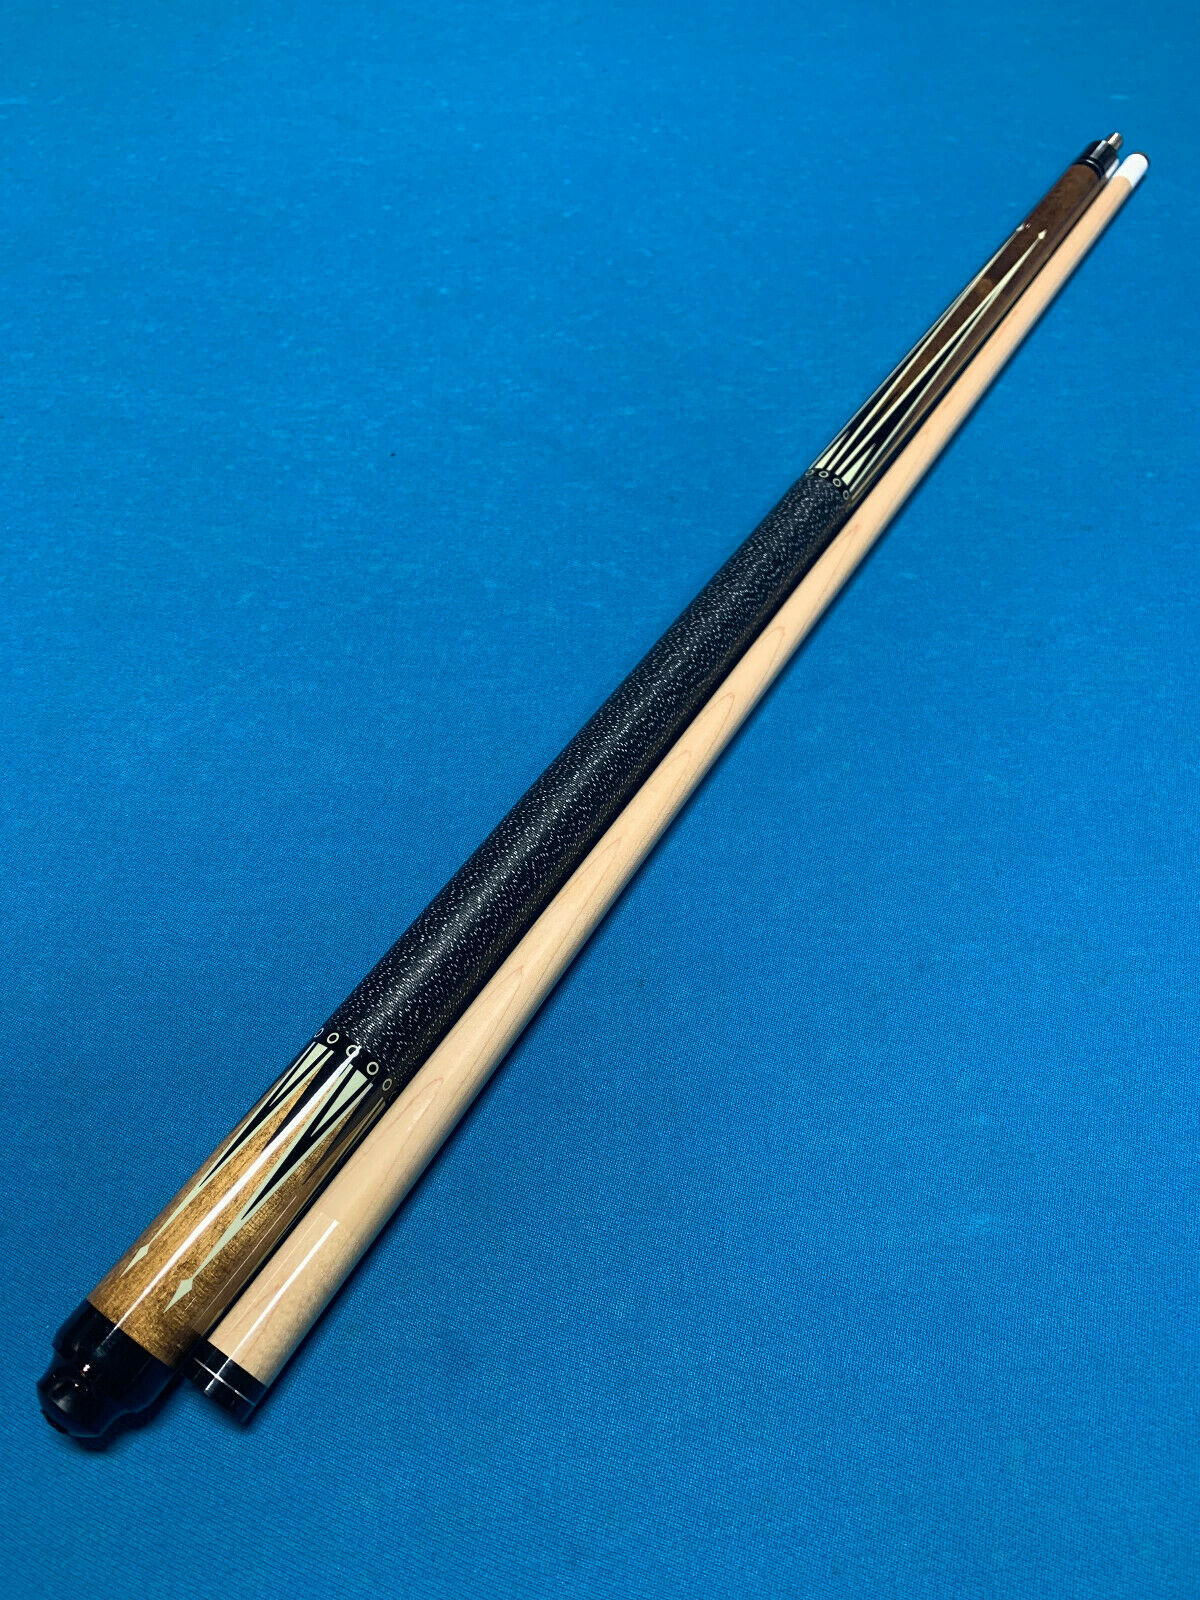 Brand New Mcdermott Pool Cue With Accessories Billiards Stick Free Case